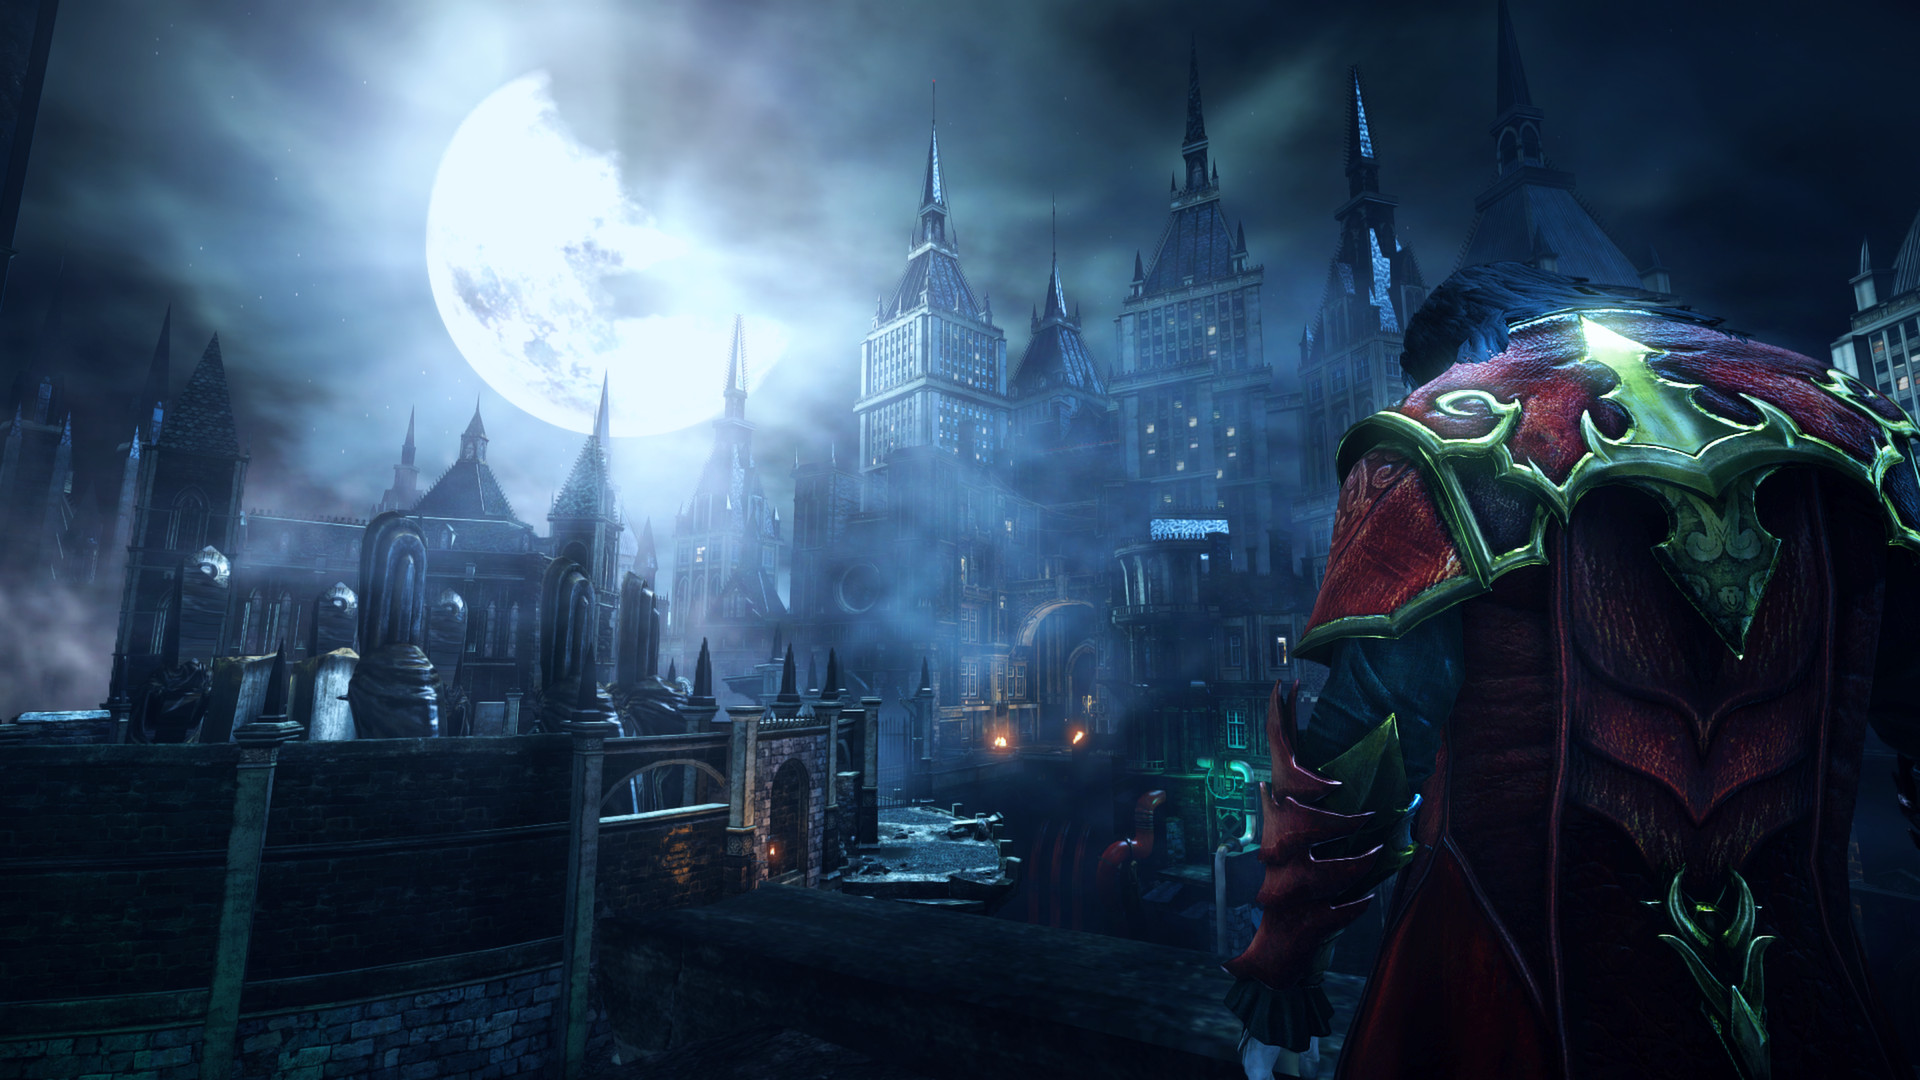 Castlevania: Lords of Shadow' Series Now Backward Compatible On